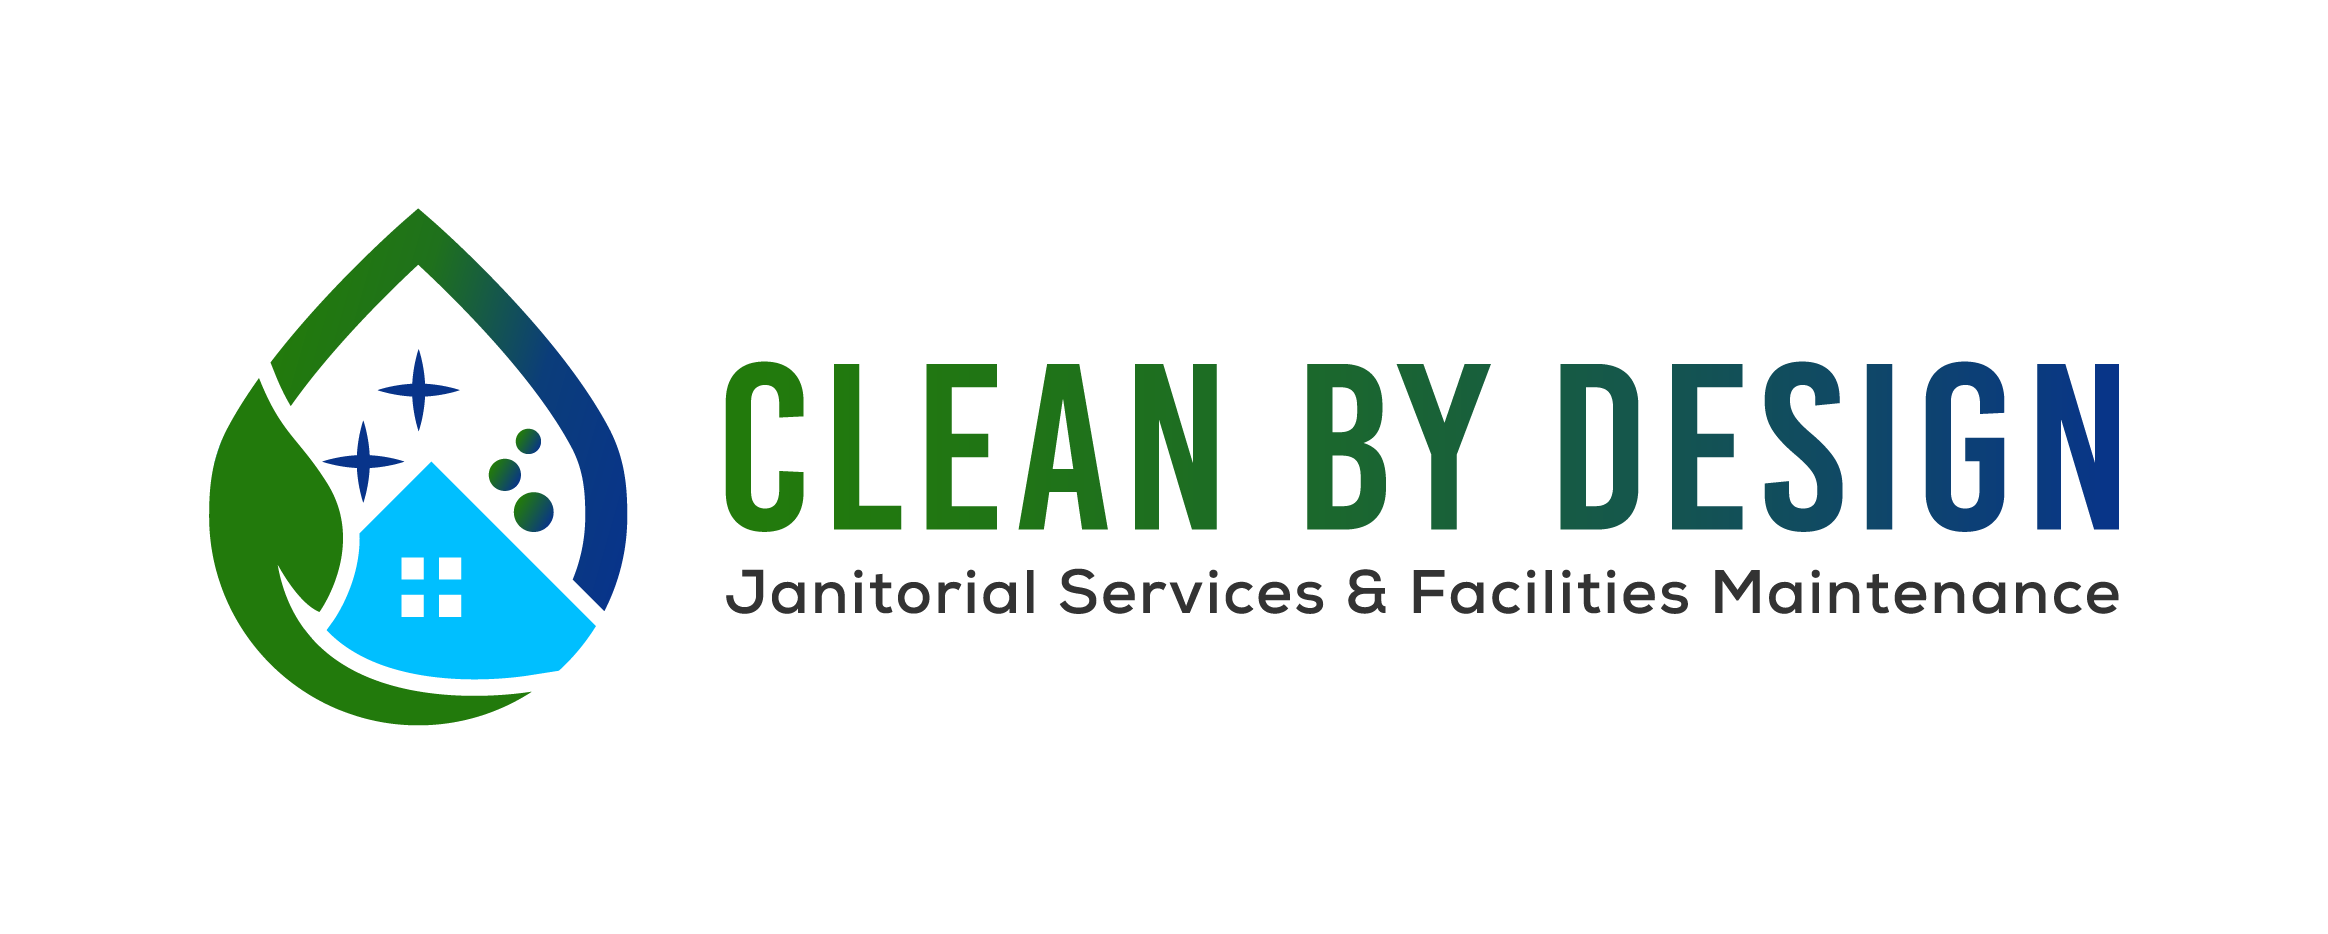 Clean By Design Janitorial Commercial Cleaning Services.